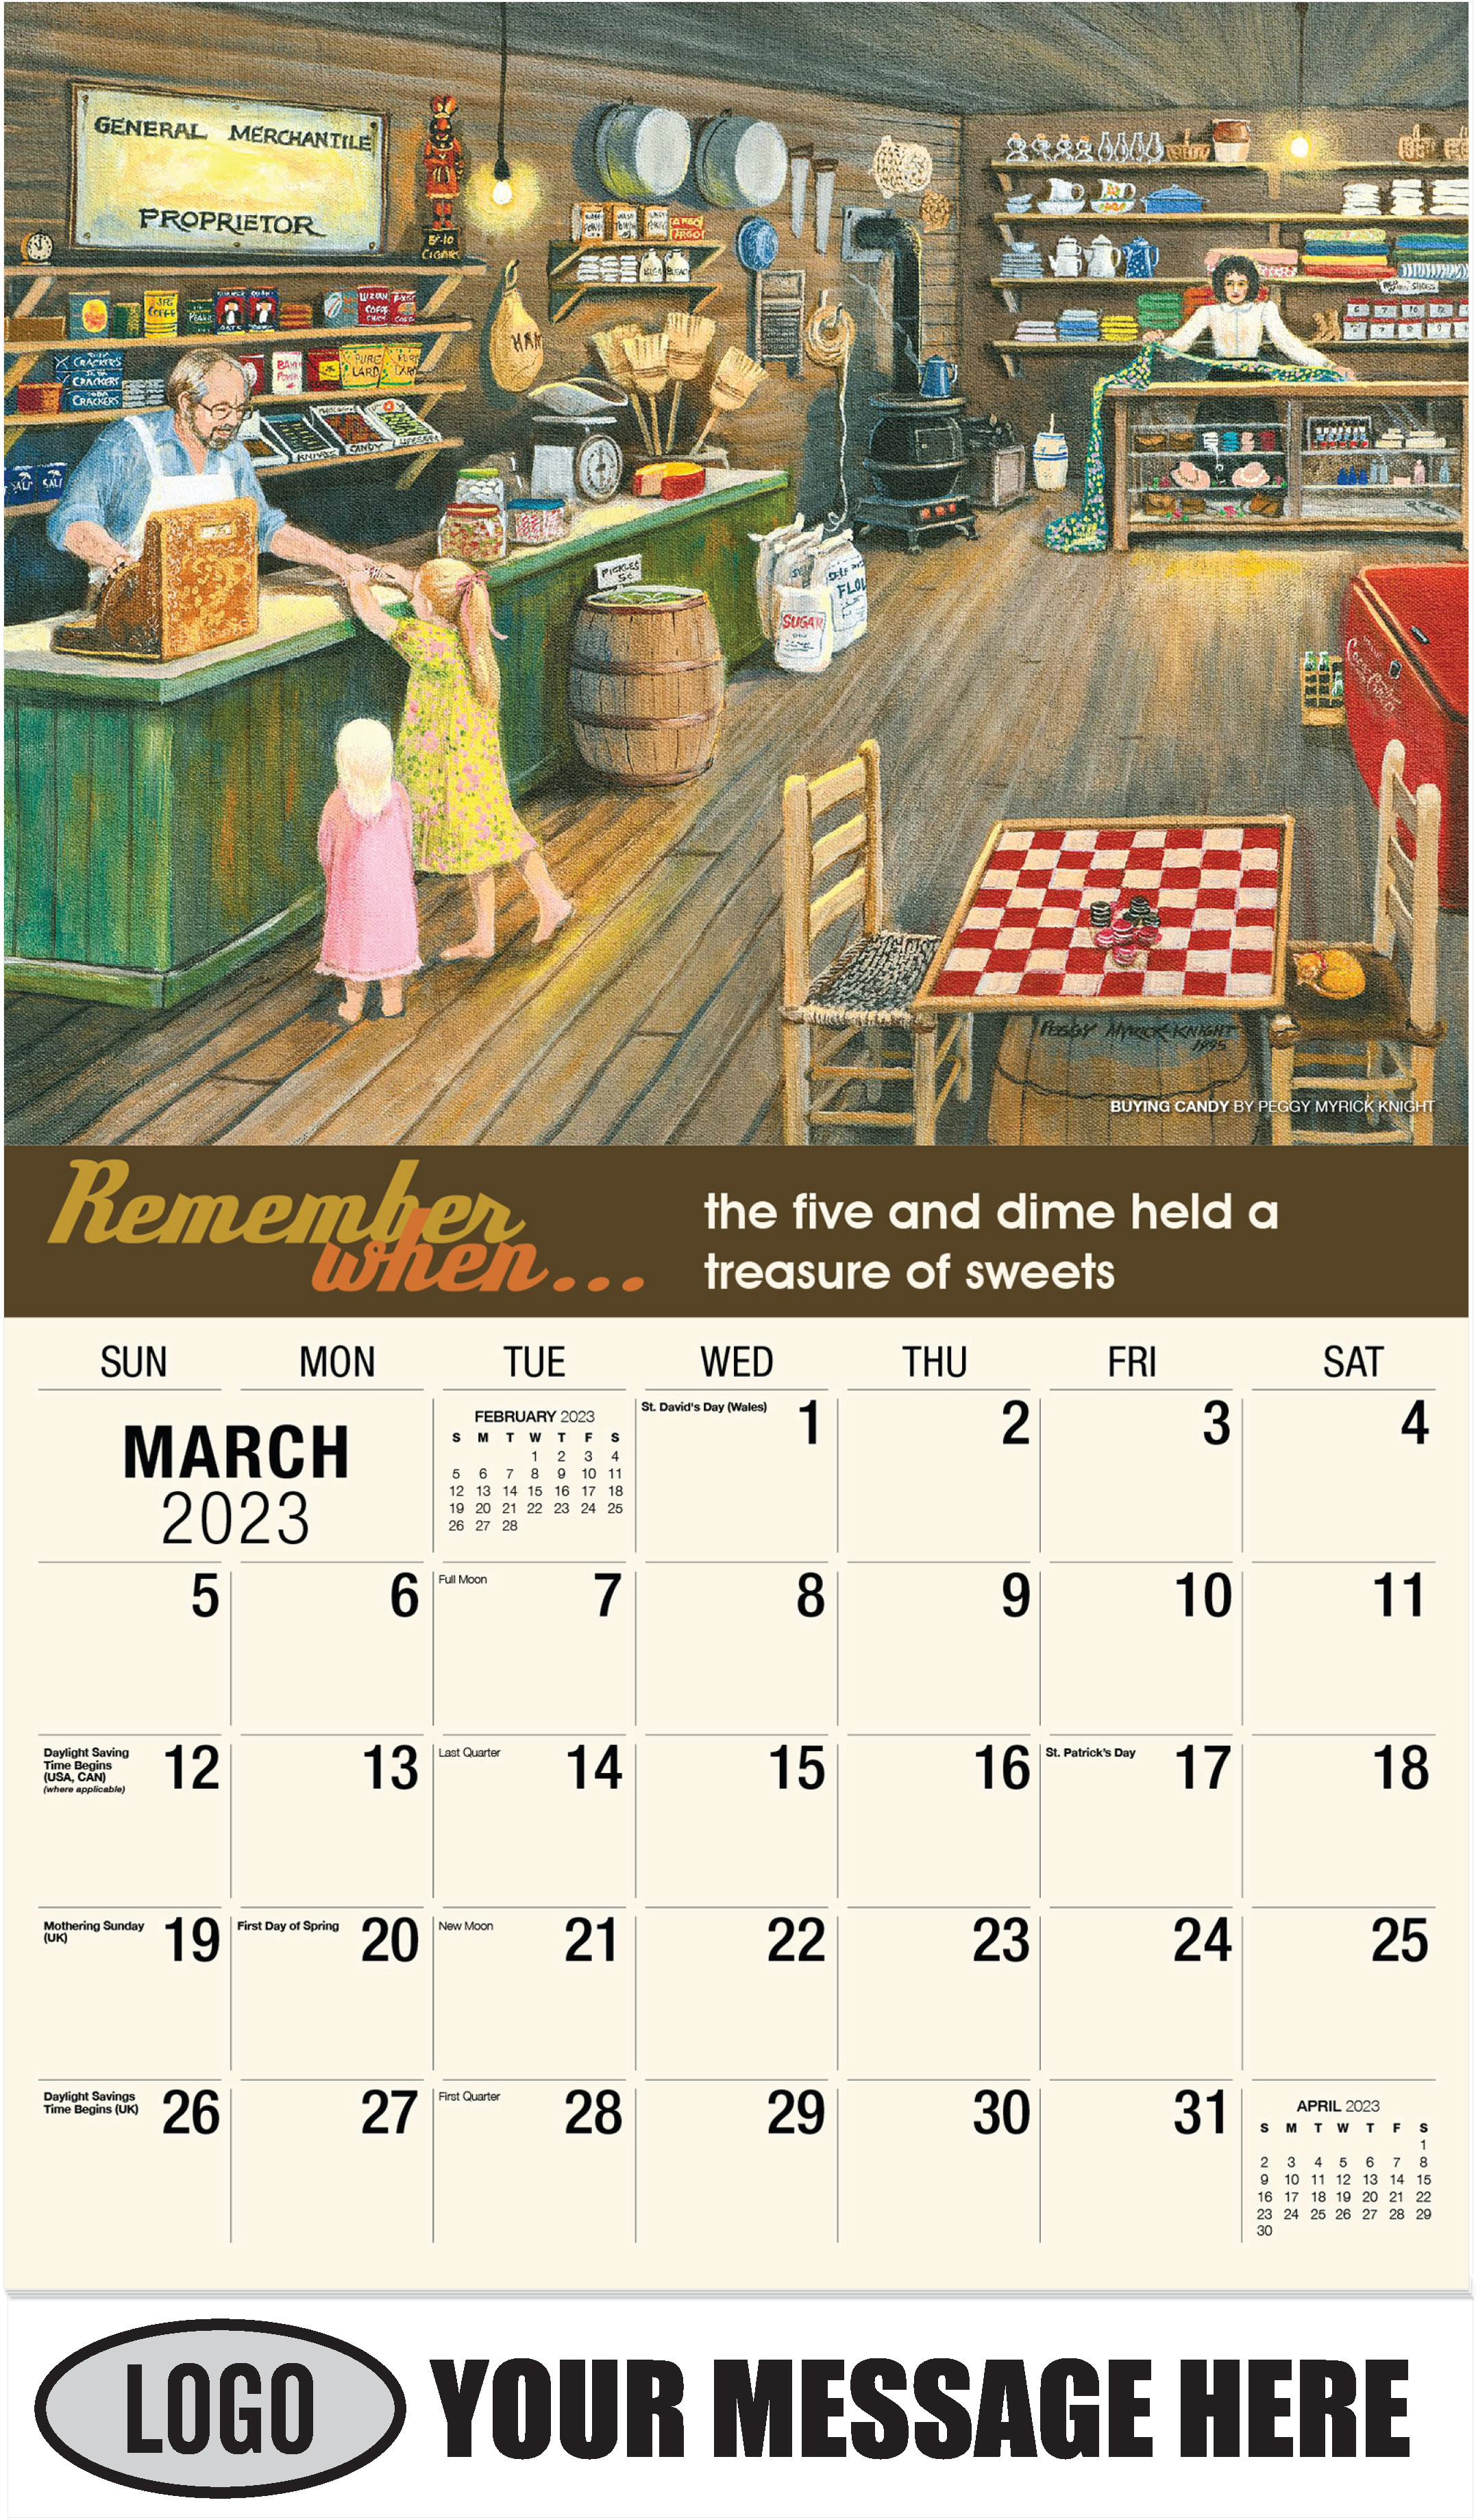 Buying Candy by Peggy Myrick Knight - March - Remember When 2023 Promotional Calendar